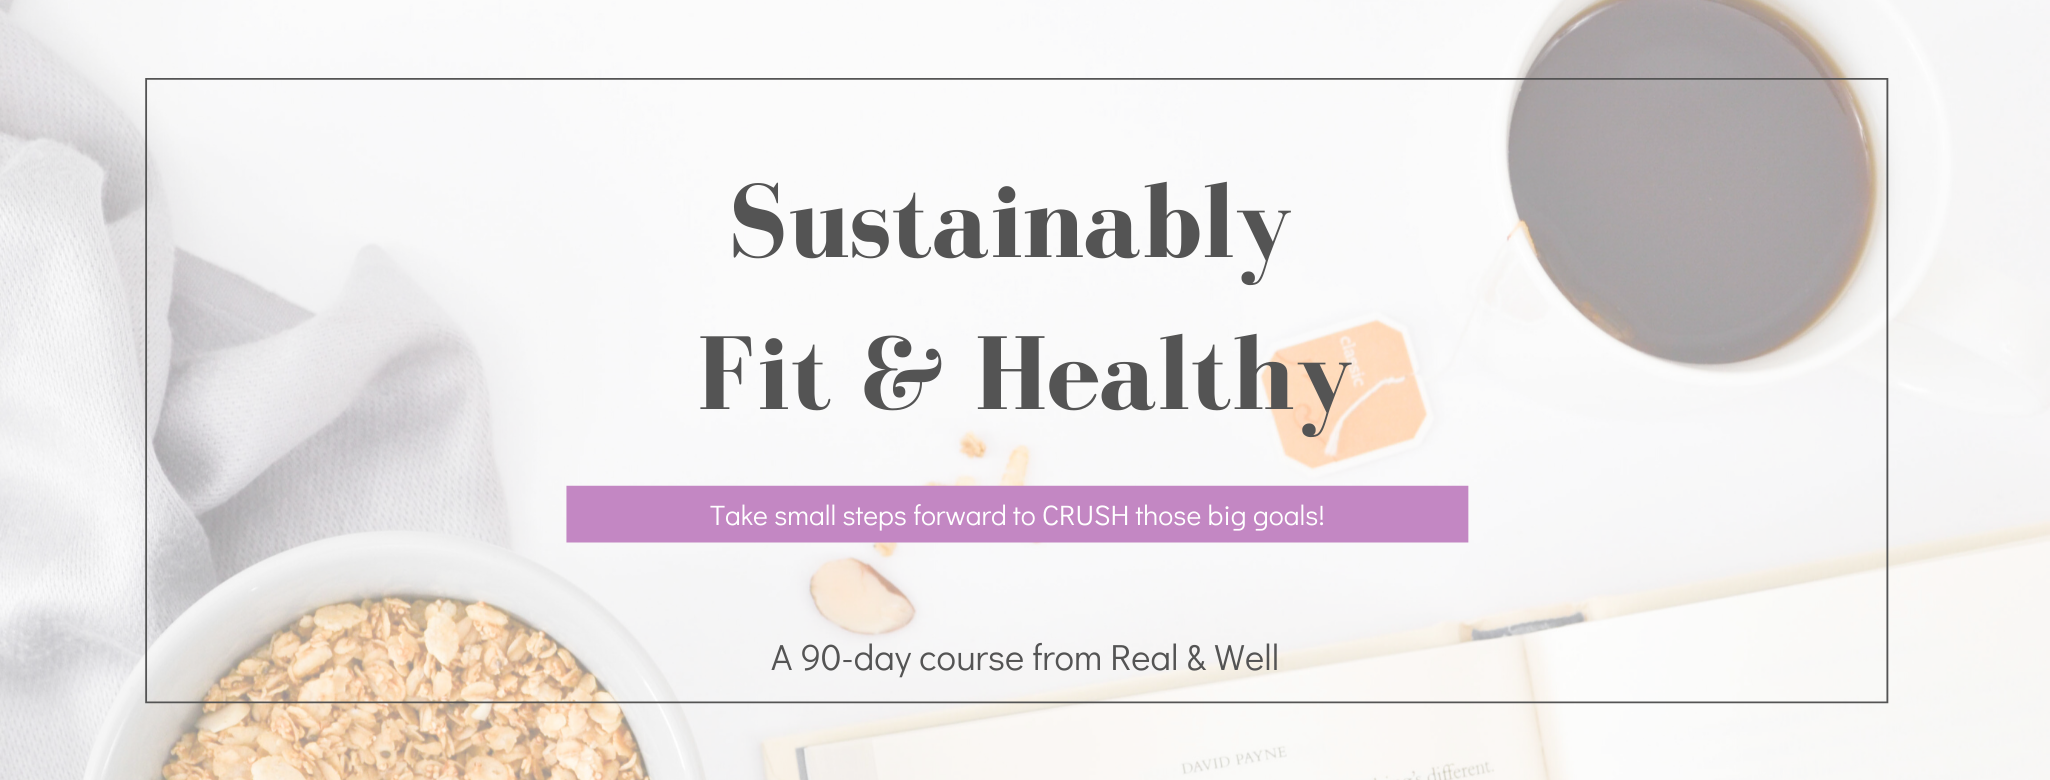 Sustainably Fit & Healthy Promo Cover